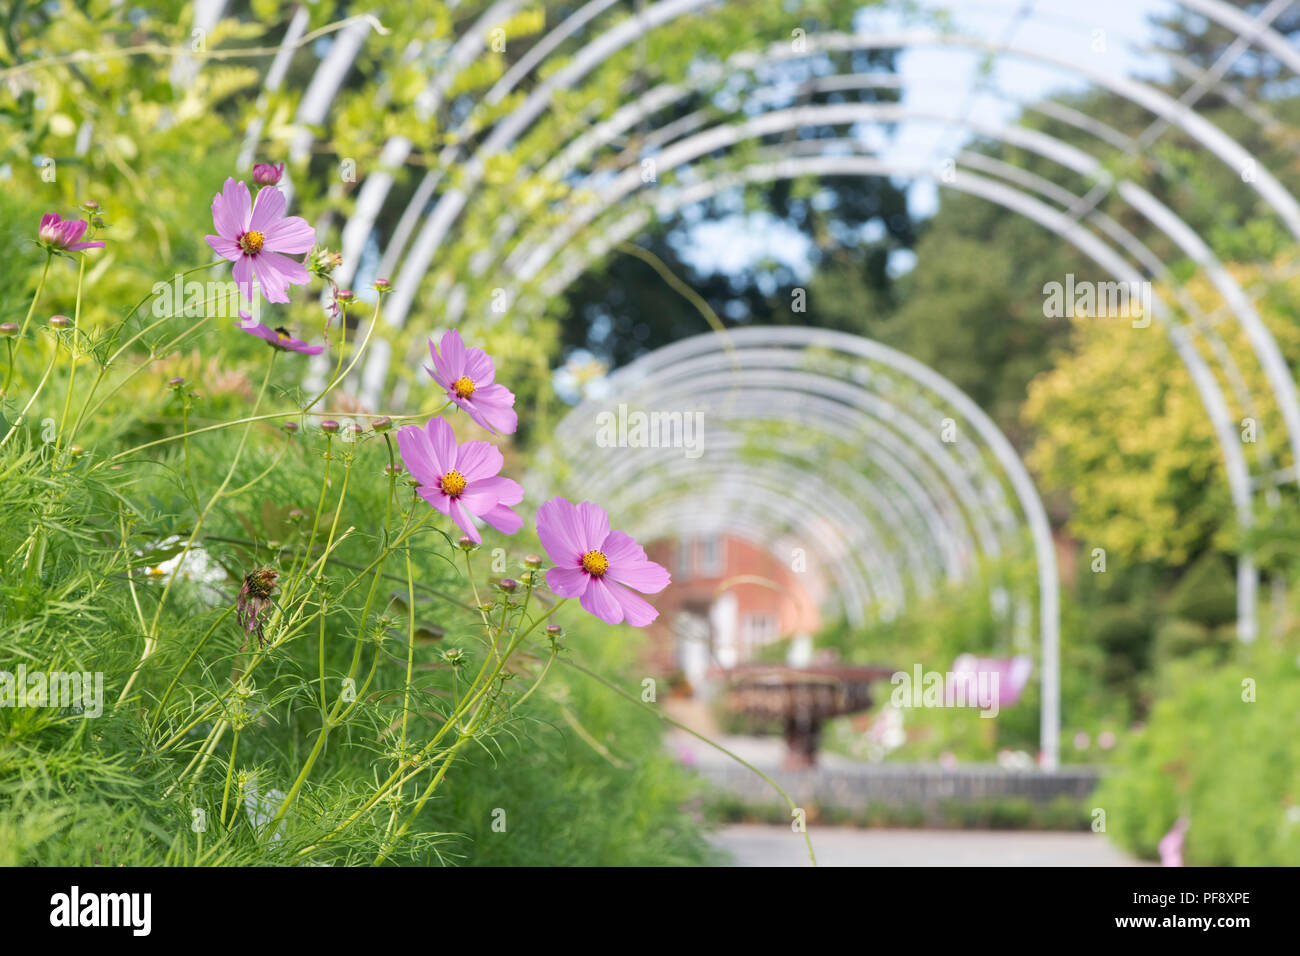 Cosmos bipinnatus. Cosmos flowers at RHS Wisley gardens in august. Mexican aster Stock Photo